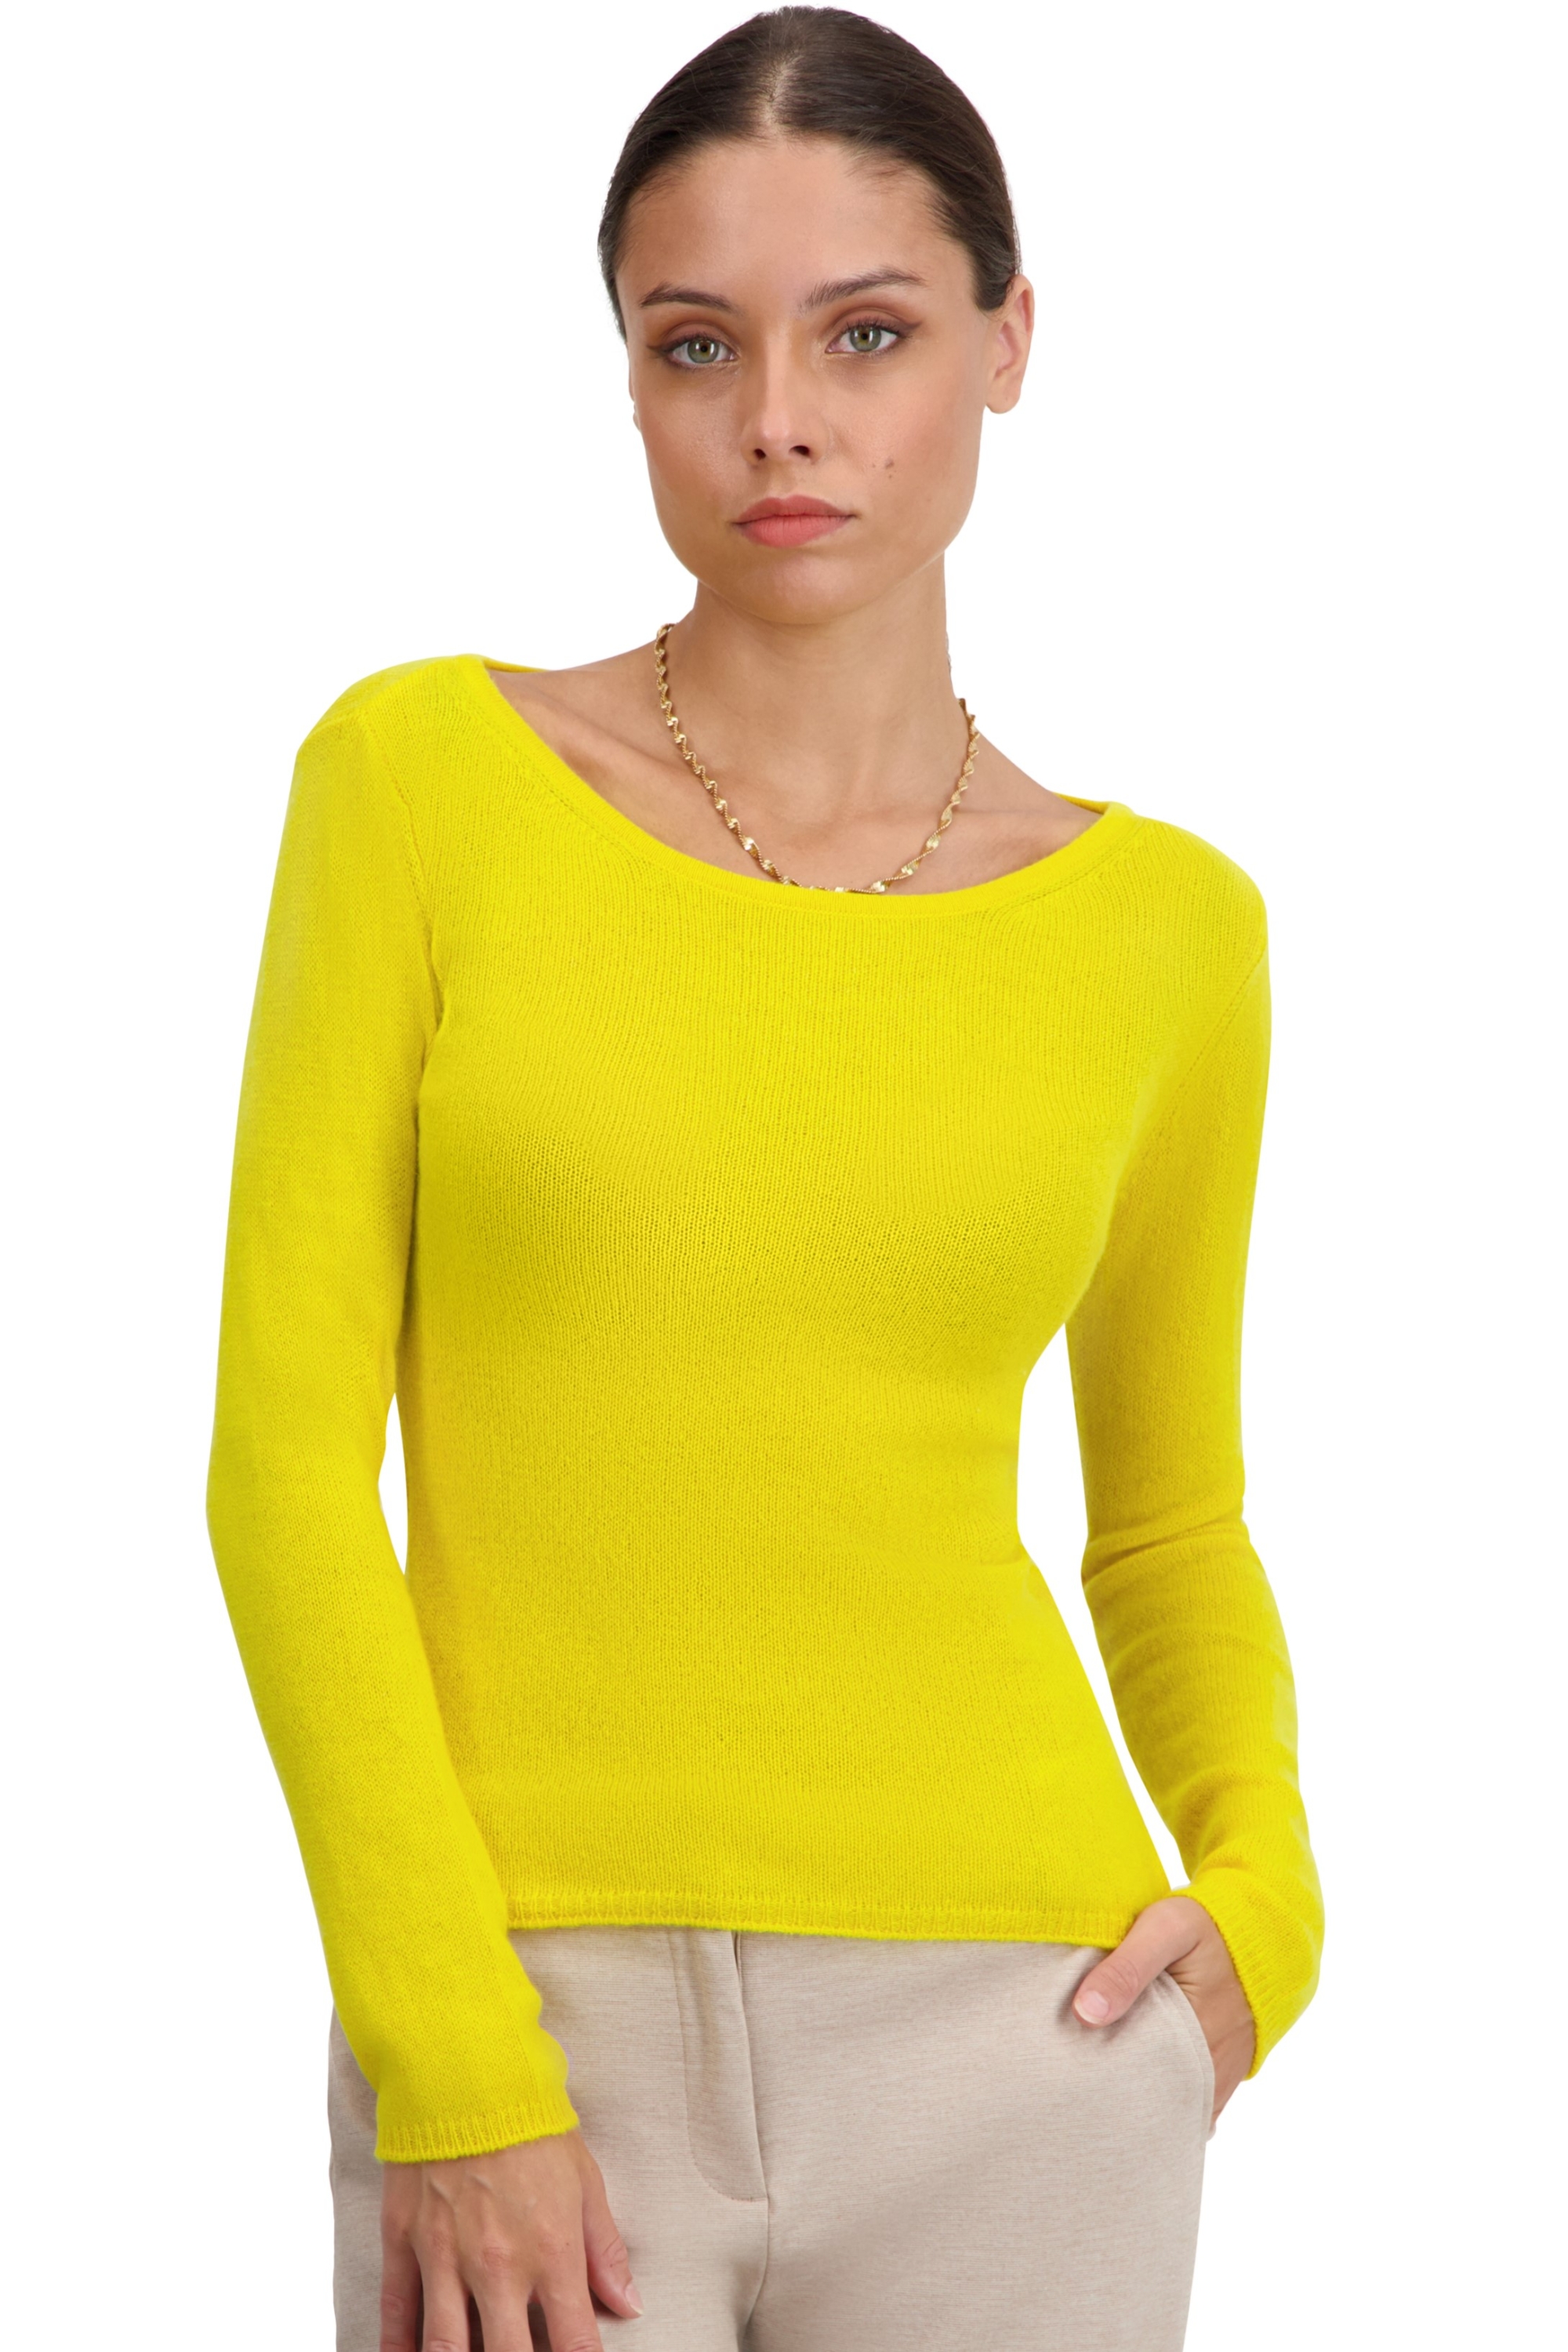 Cashmere ladies timeless classics caleen cyber yellow xl